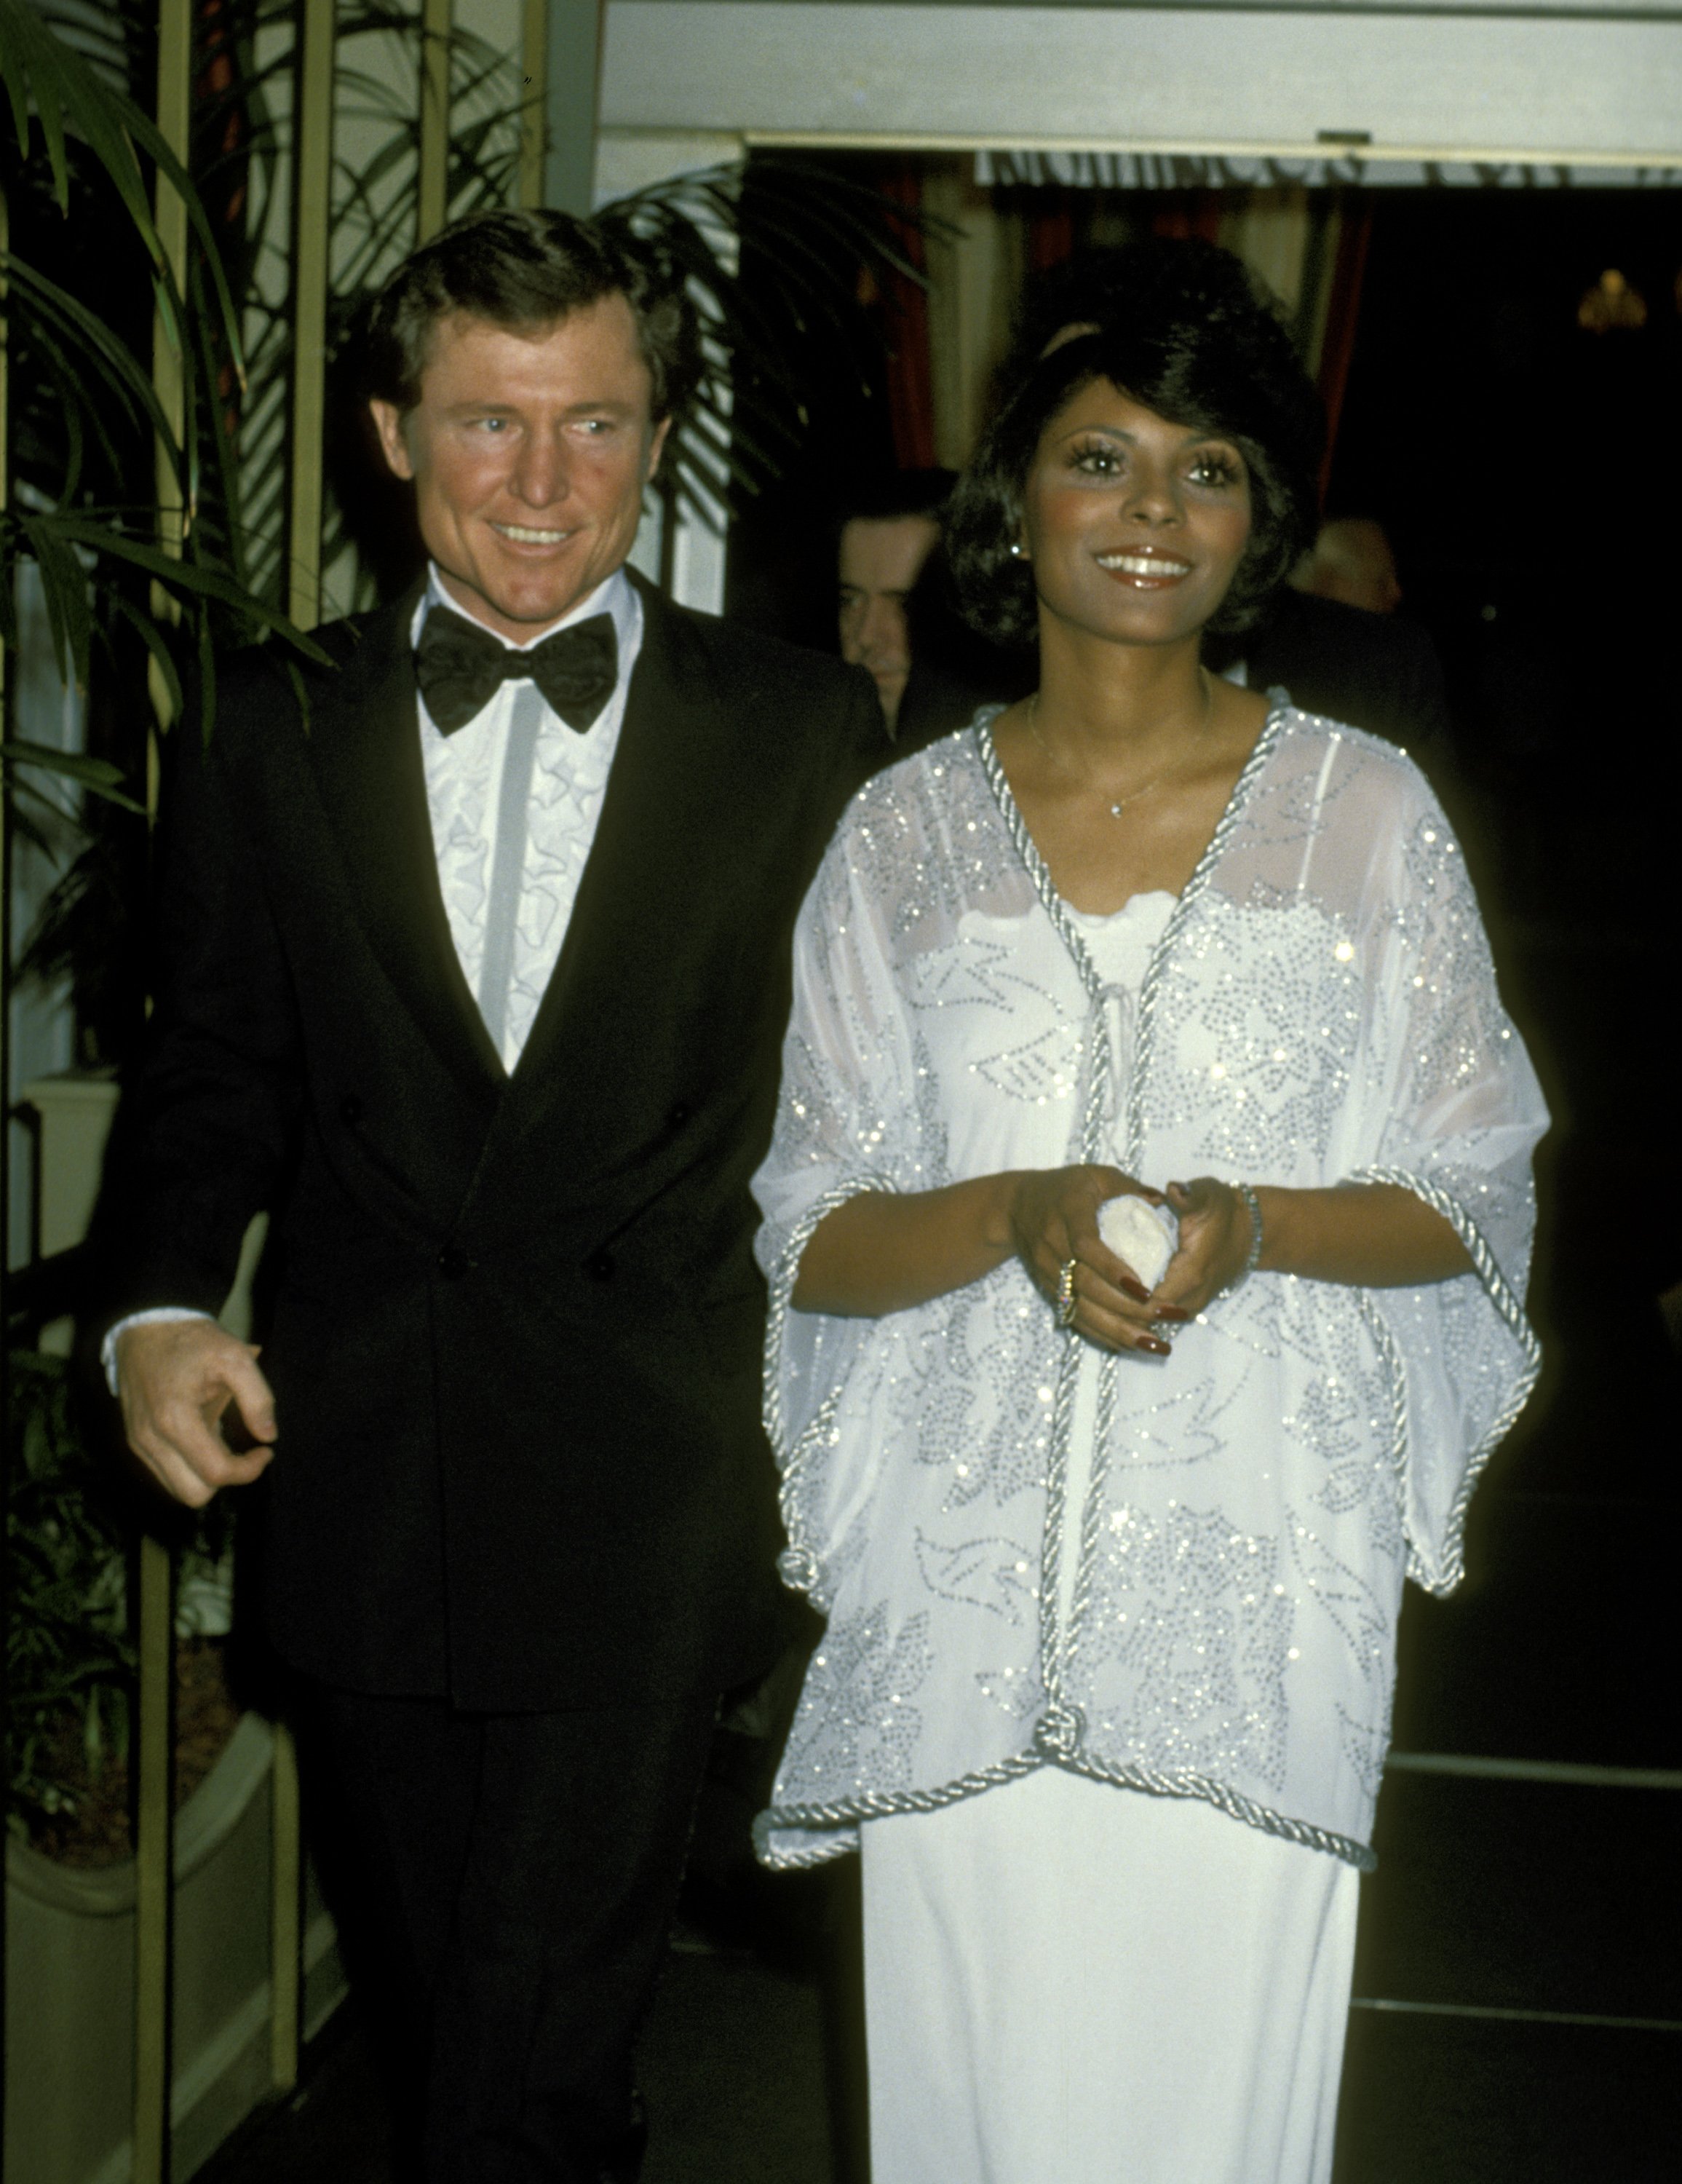 Leslie Uggams and Husband Grahame Pratt during 35th Annual Golden Globe Awards at Beverly Hilton Hotel in Beverly Hills, California, United States. January 28, 1978 | Source: Getty Images 